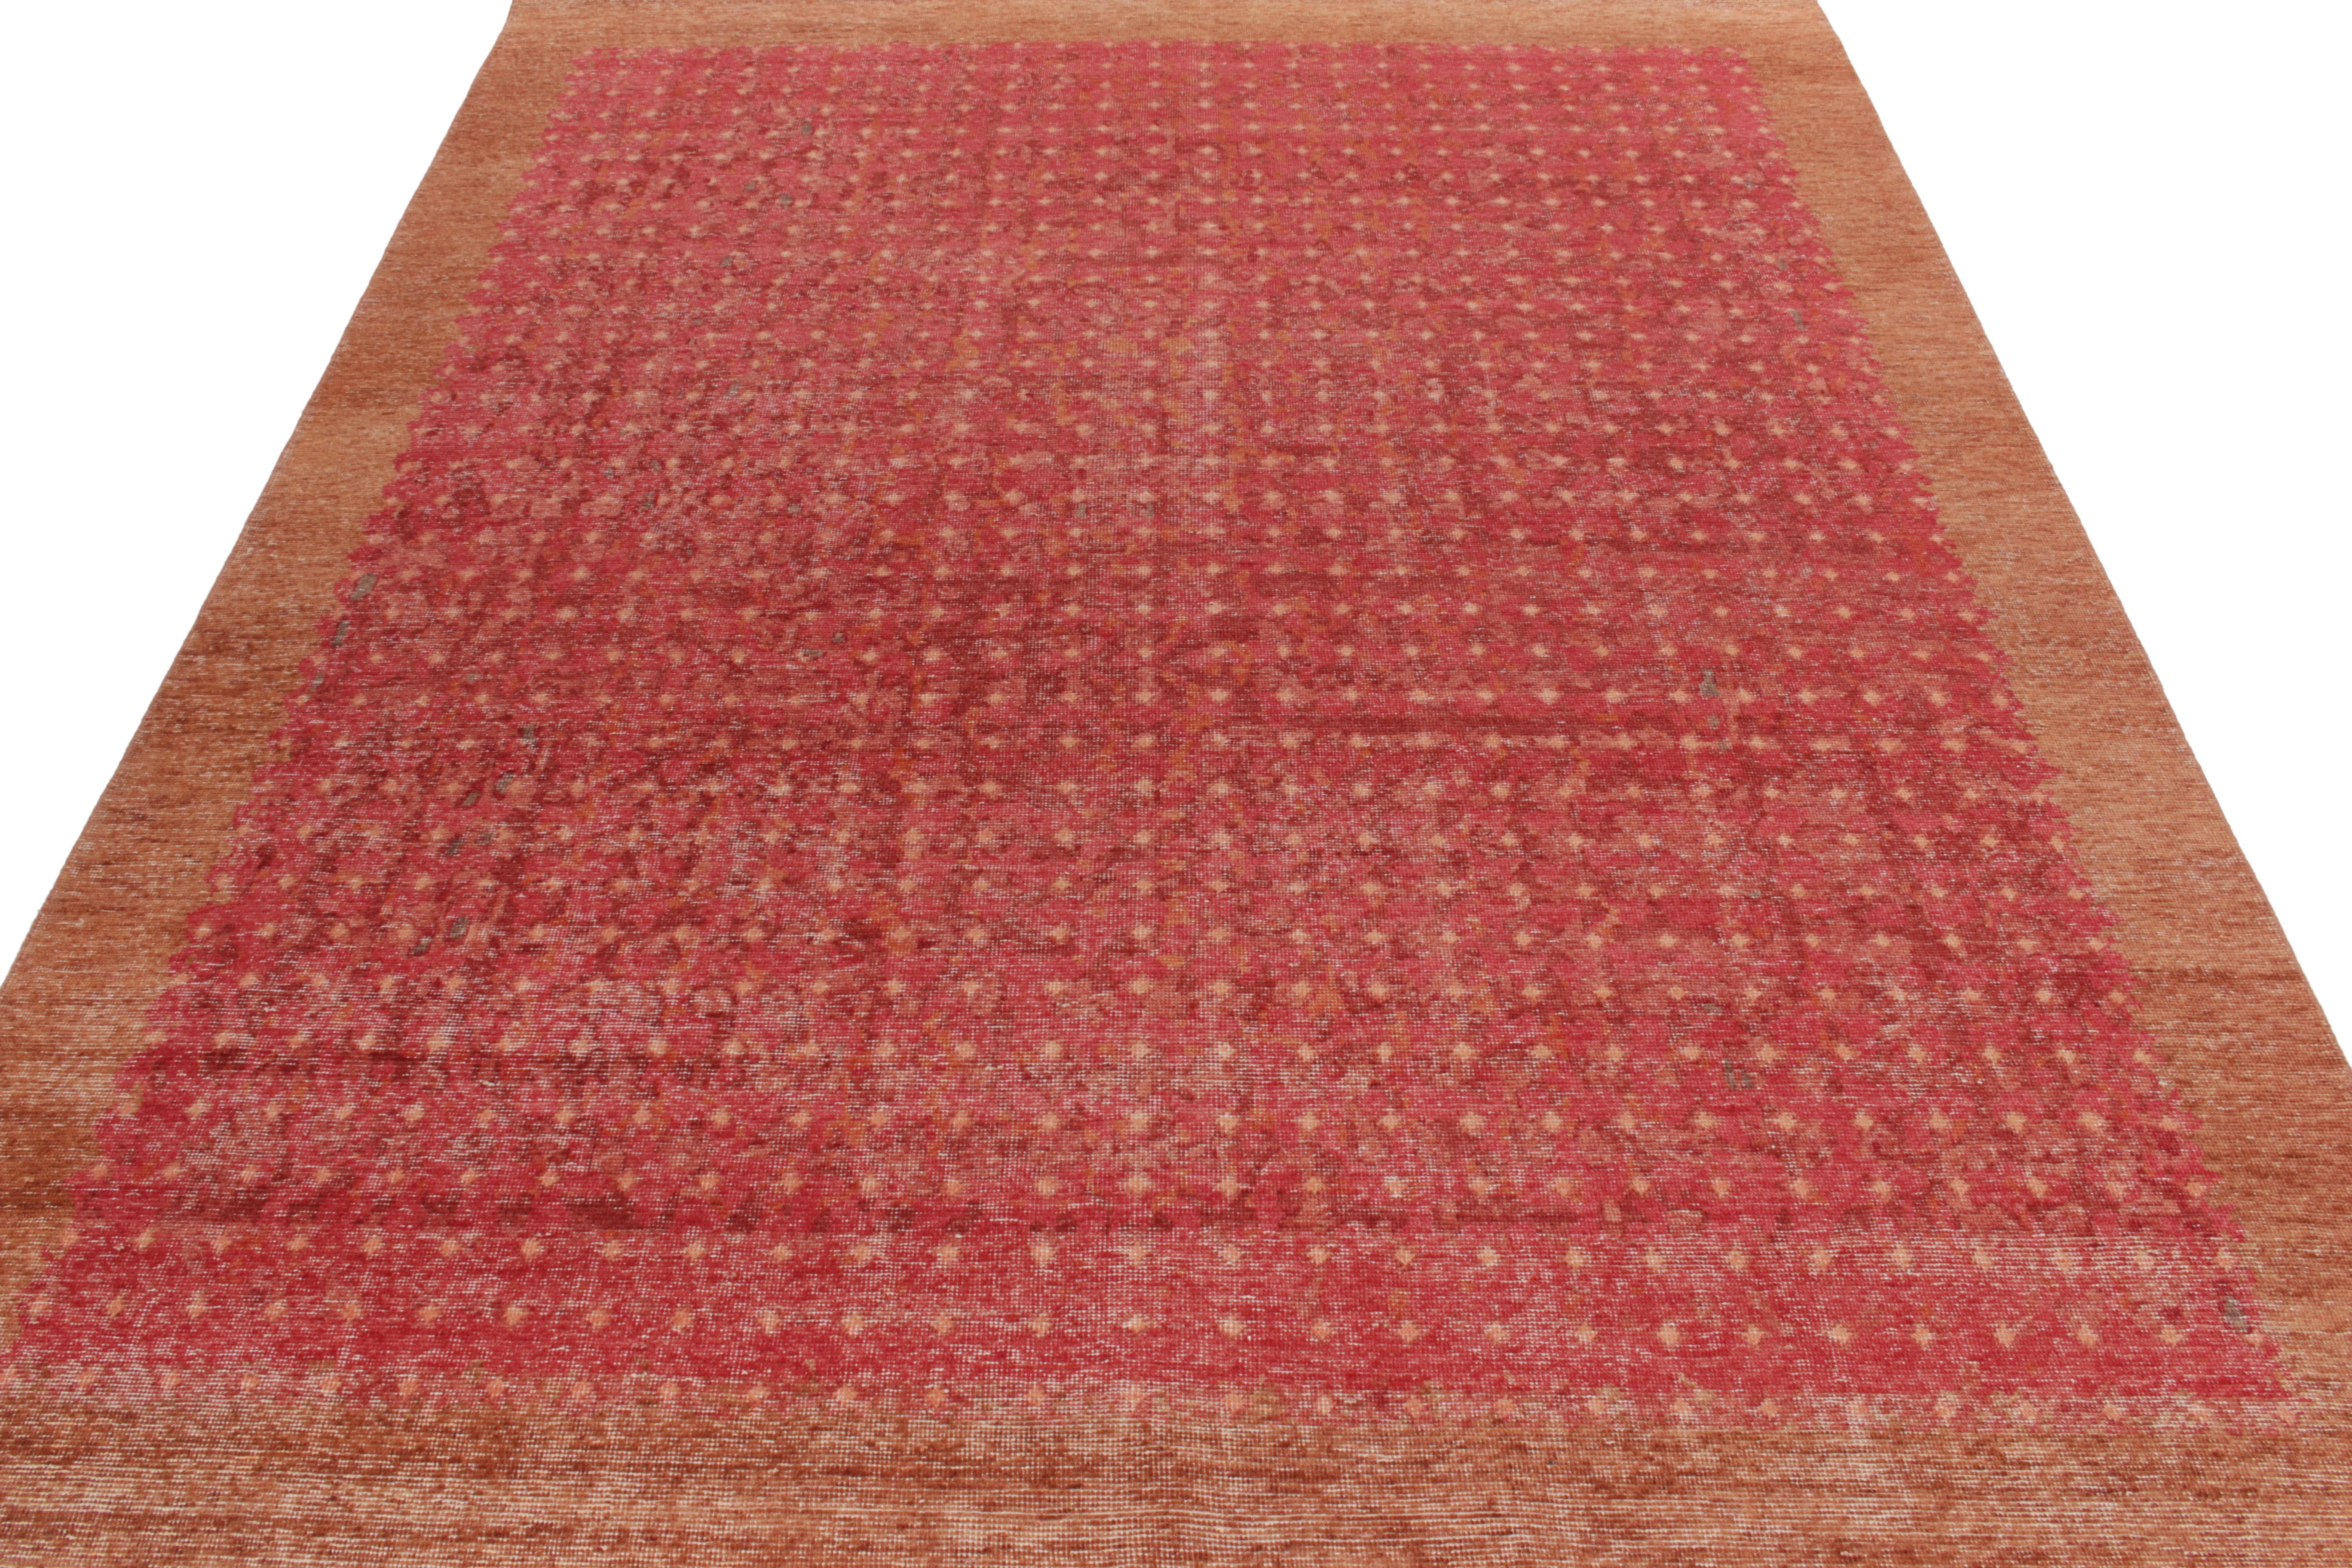 Representing the diverse archive of cultural patterns recaptured in the Homage Collection by Rug & Kilim, this 9x12 modern rug enjoys a comfortable wash creating the aesthetic of shabby-chic, distressed look unique to the proprietary blend of